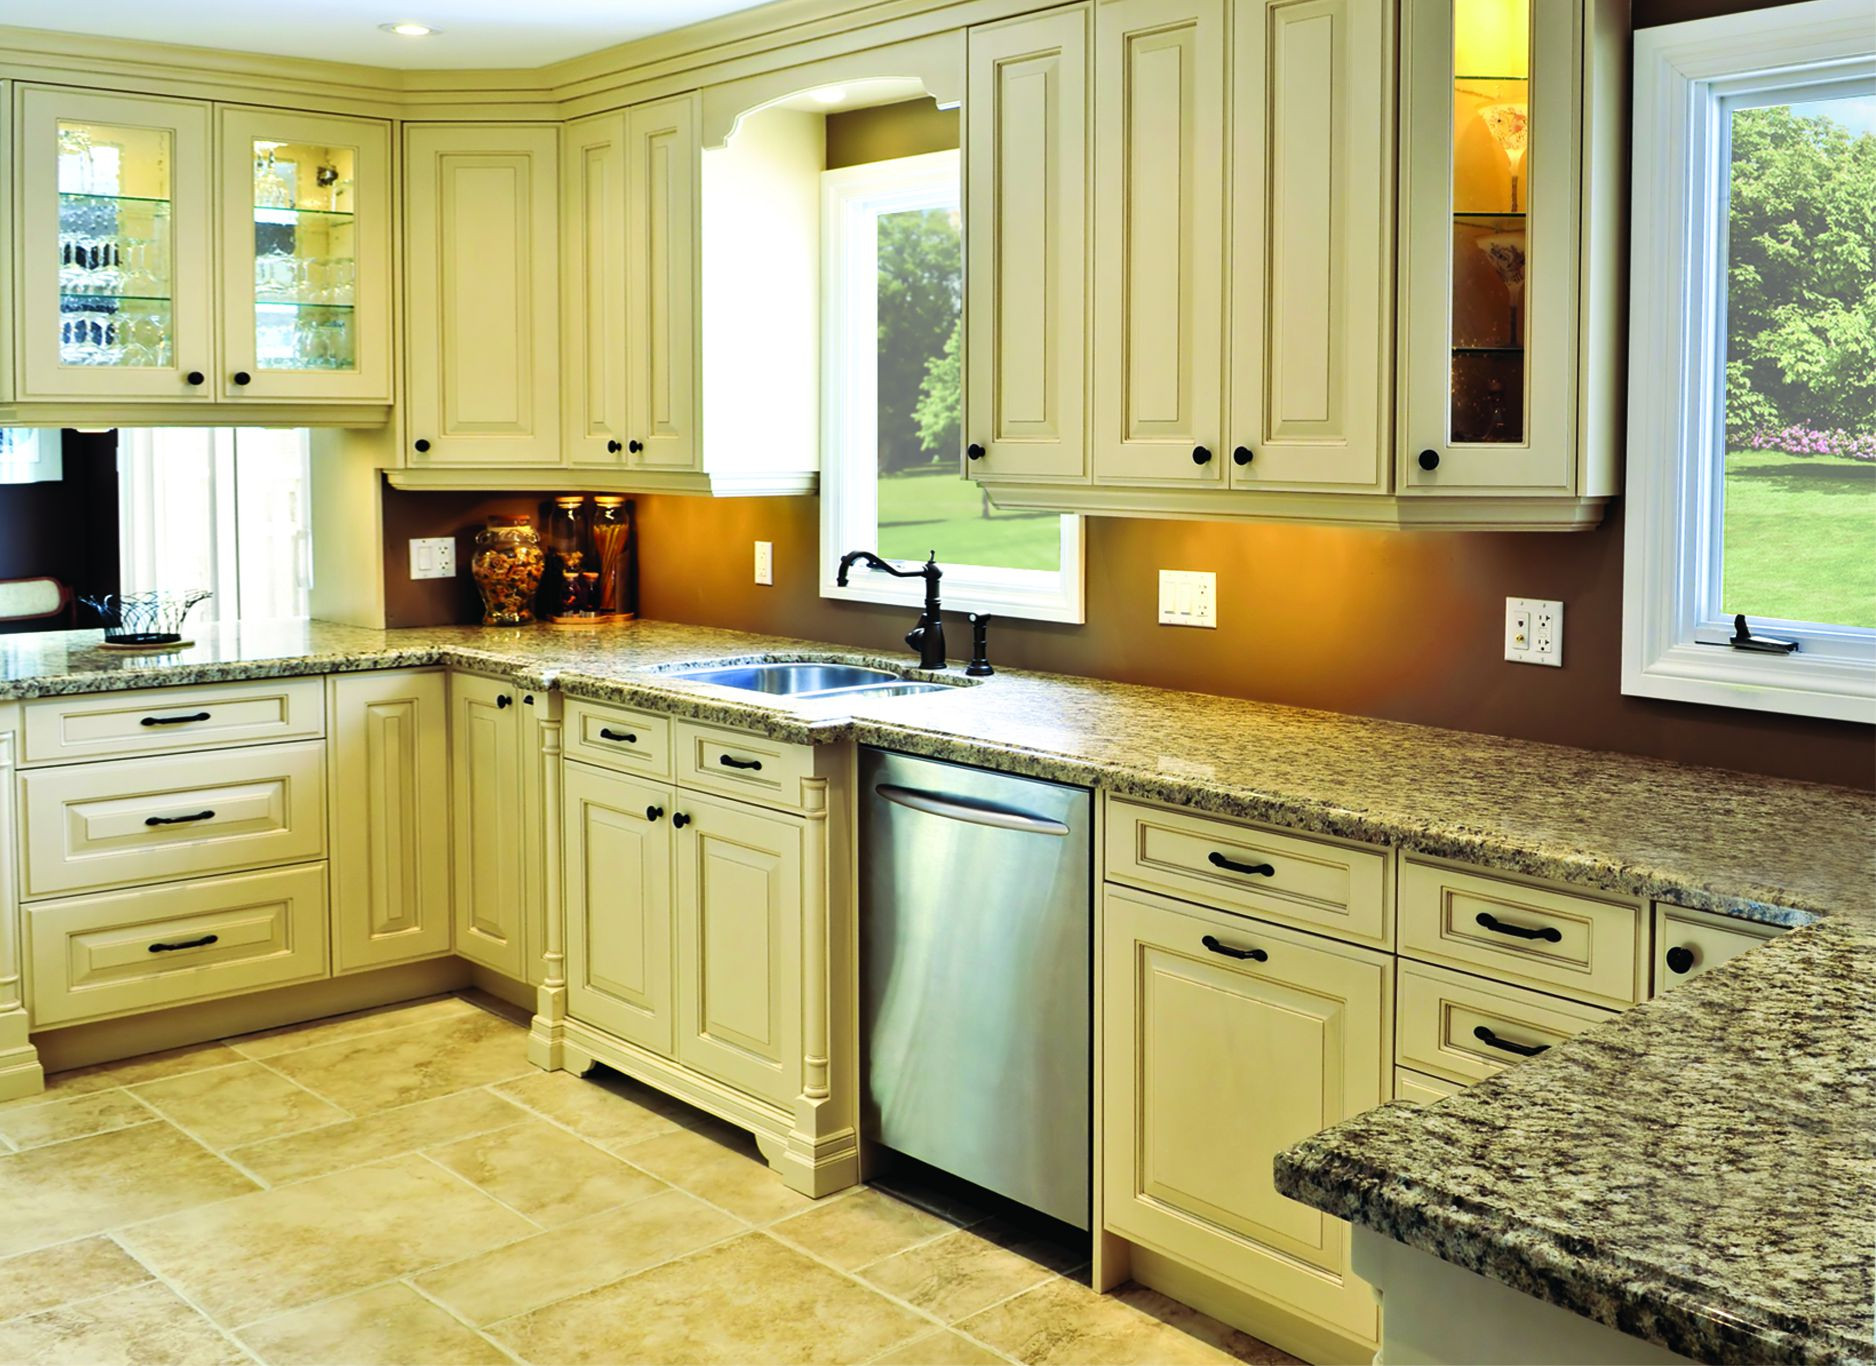 Kitchen Remodeling Photo
 Some Kitchen Remodeling Ideas To Increase The Value